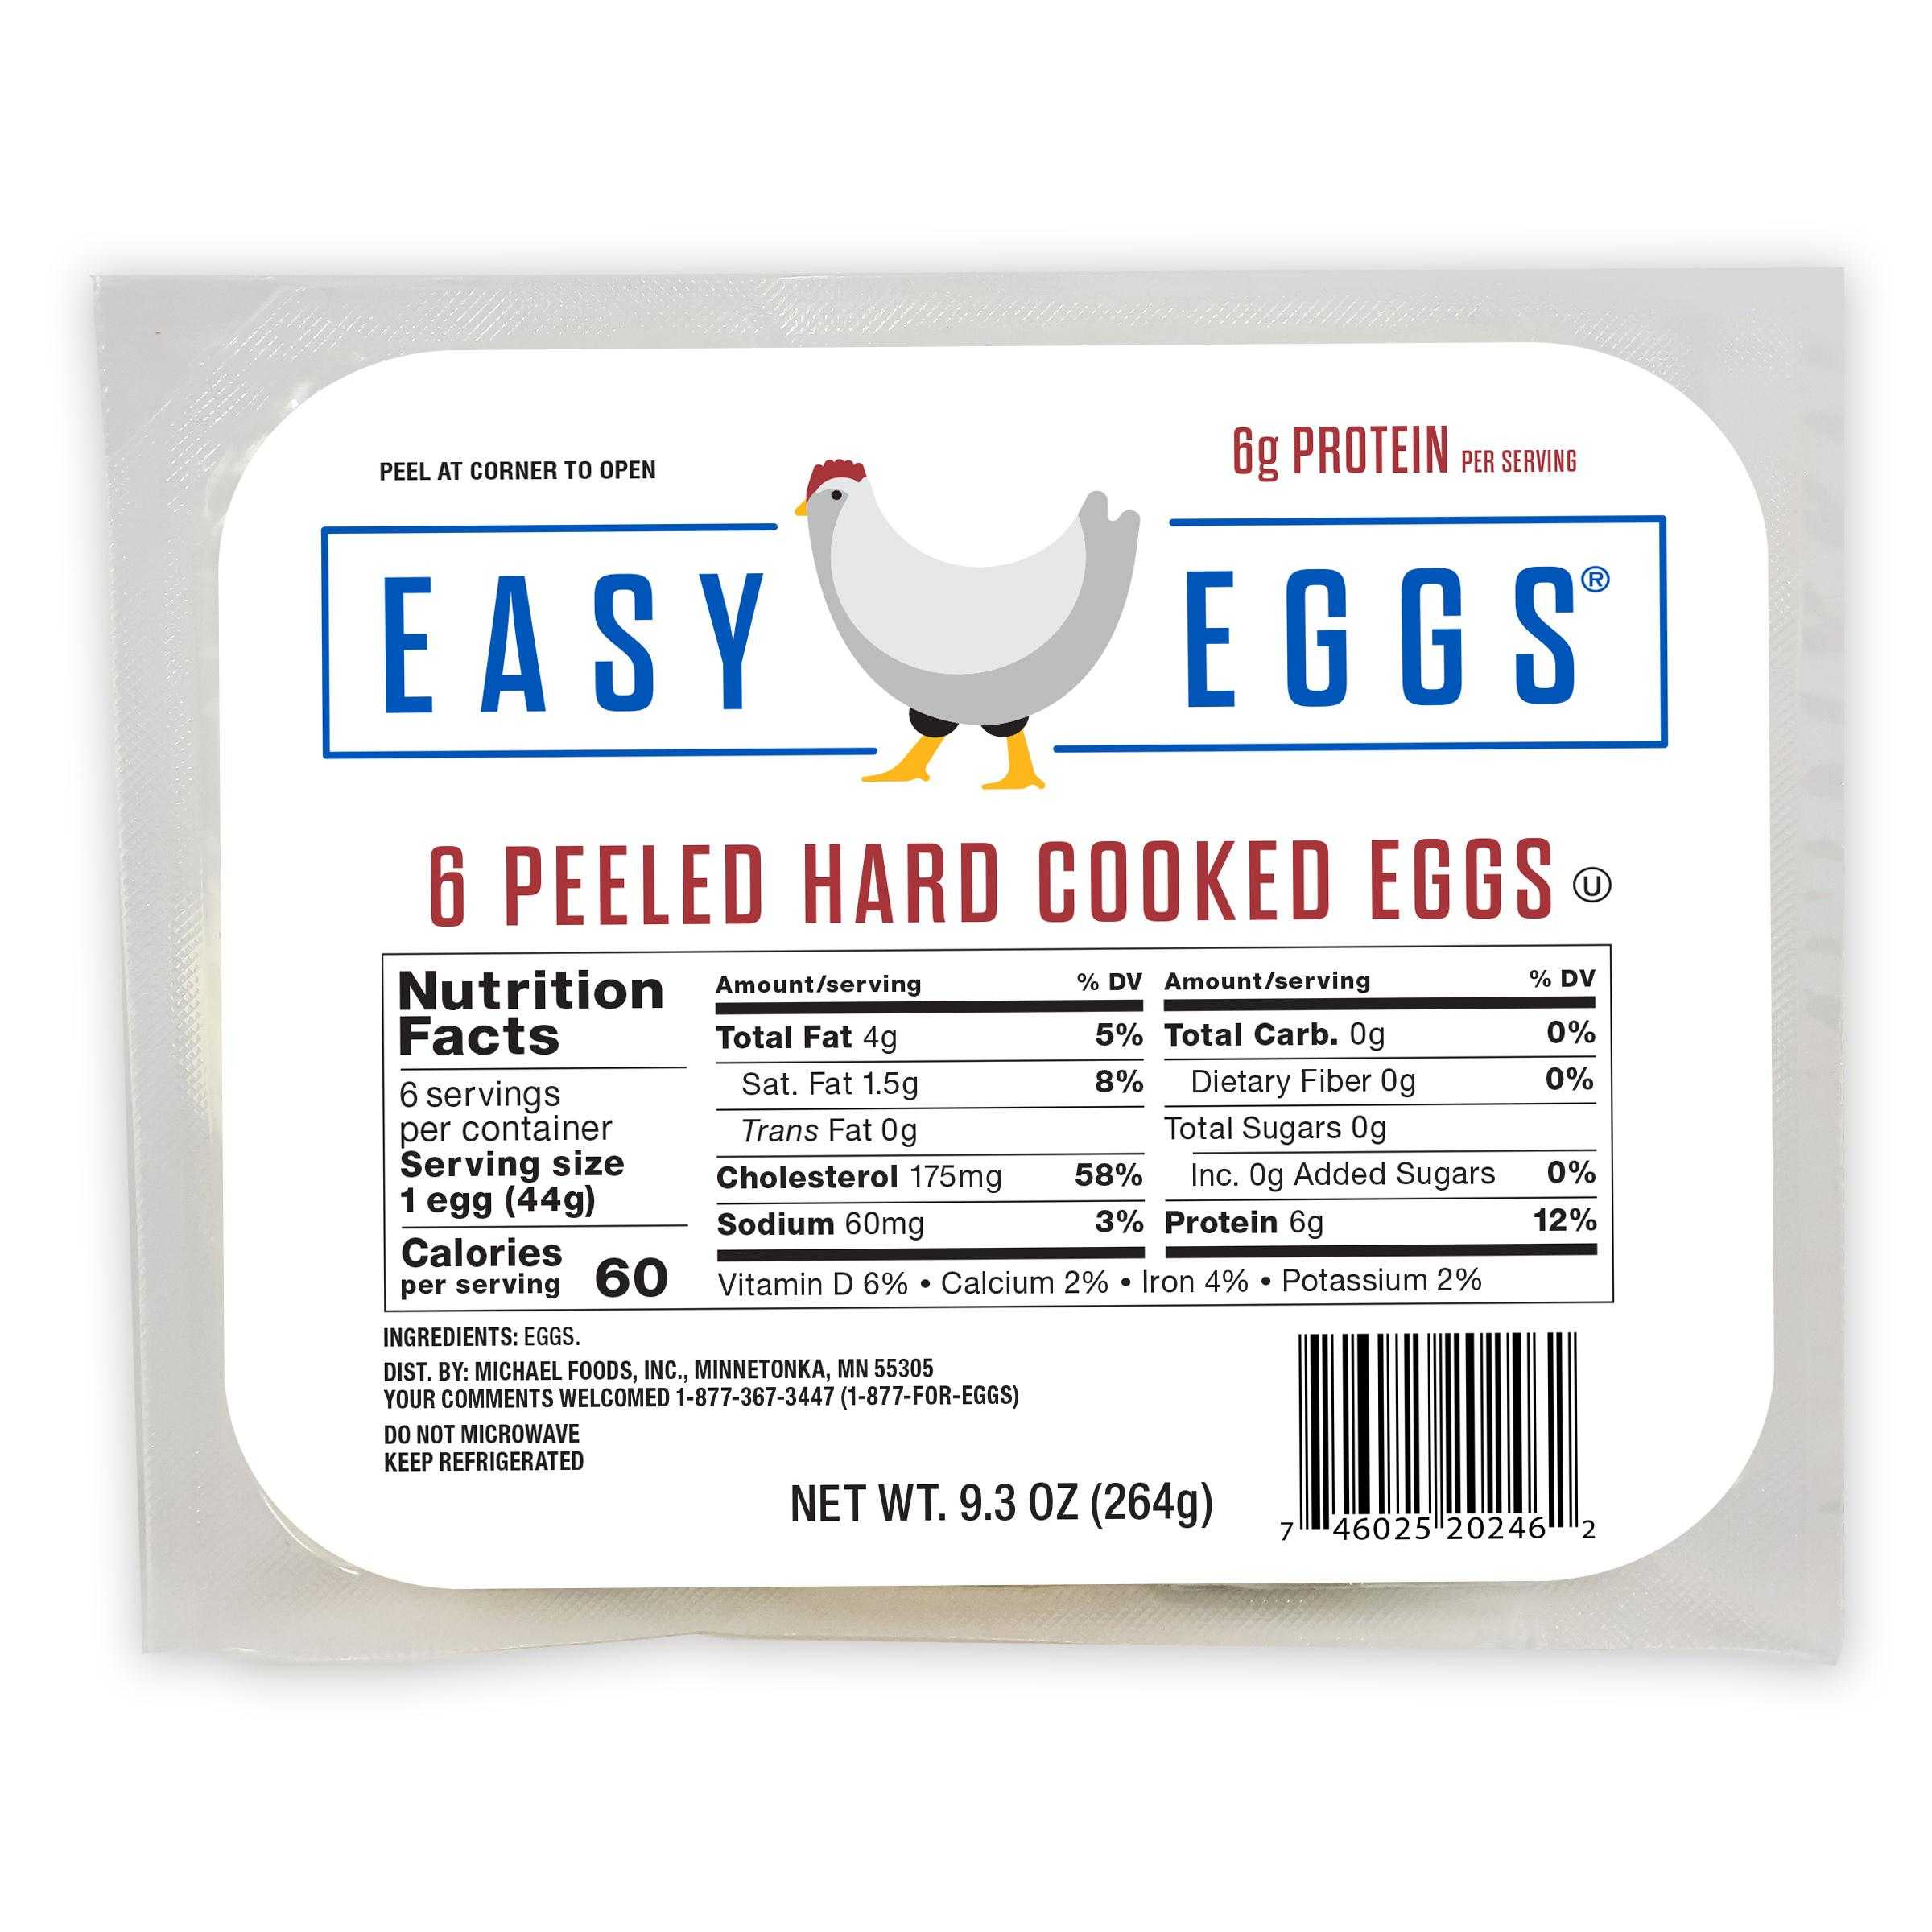 Easy Eggs® Peeled Hard Cooked Eggs, 24/6 Count Retail Ready Dry Pack